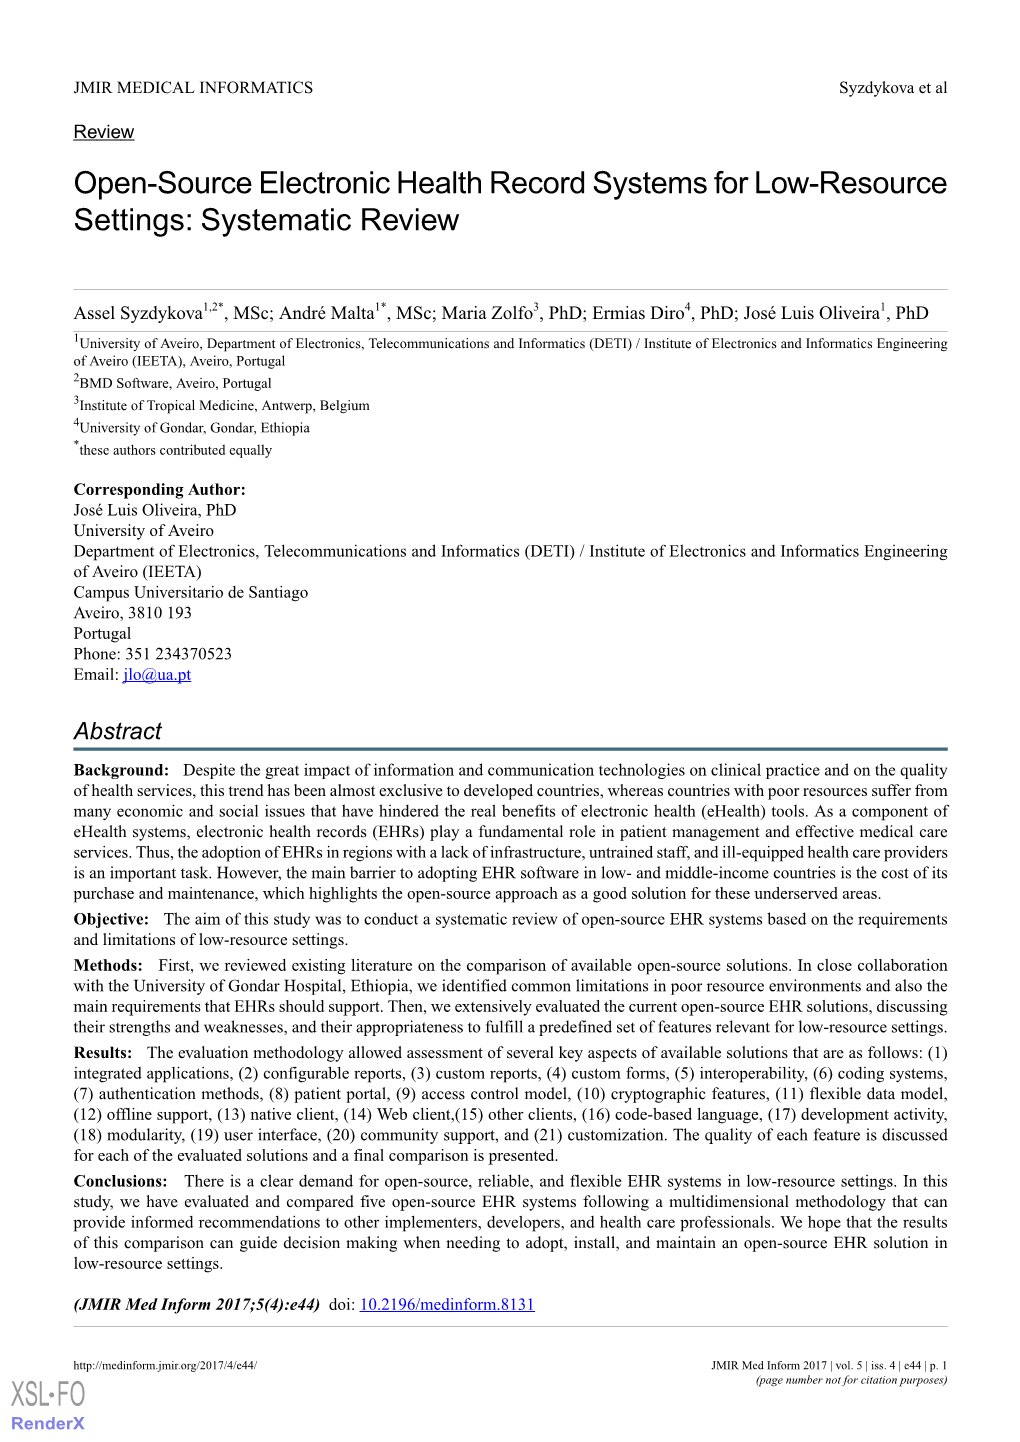 Open-Source Electronic Health Record Systems for Low-Resource Settings: Systematic Review